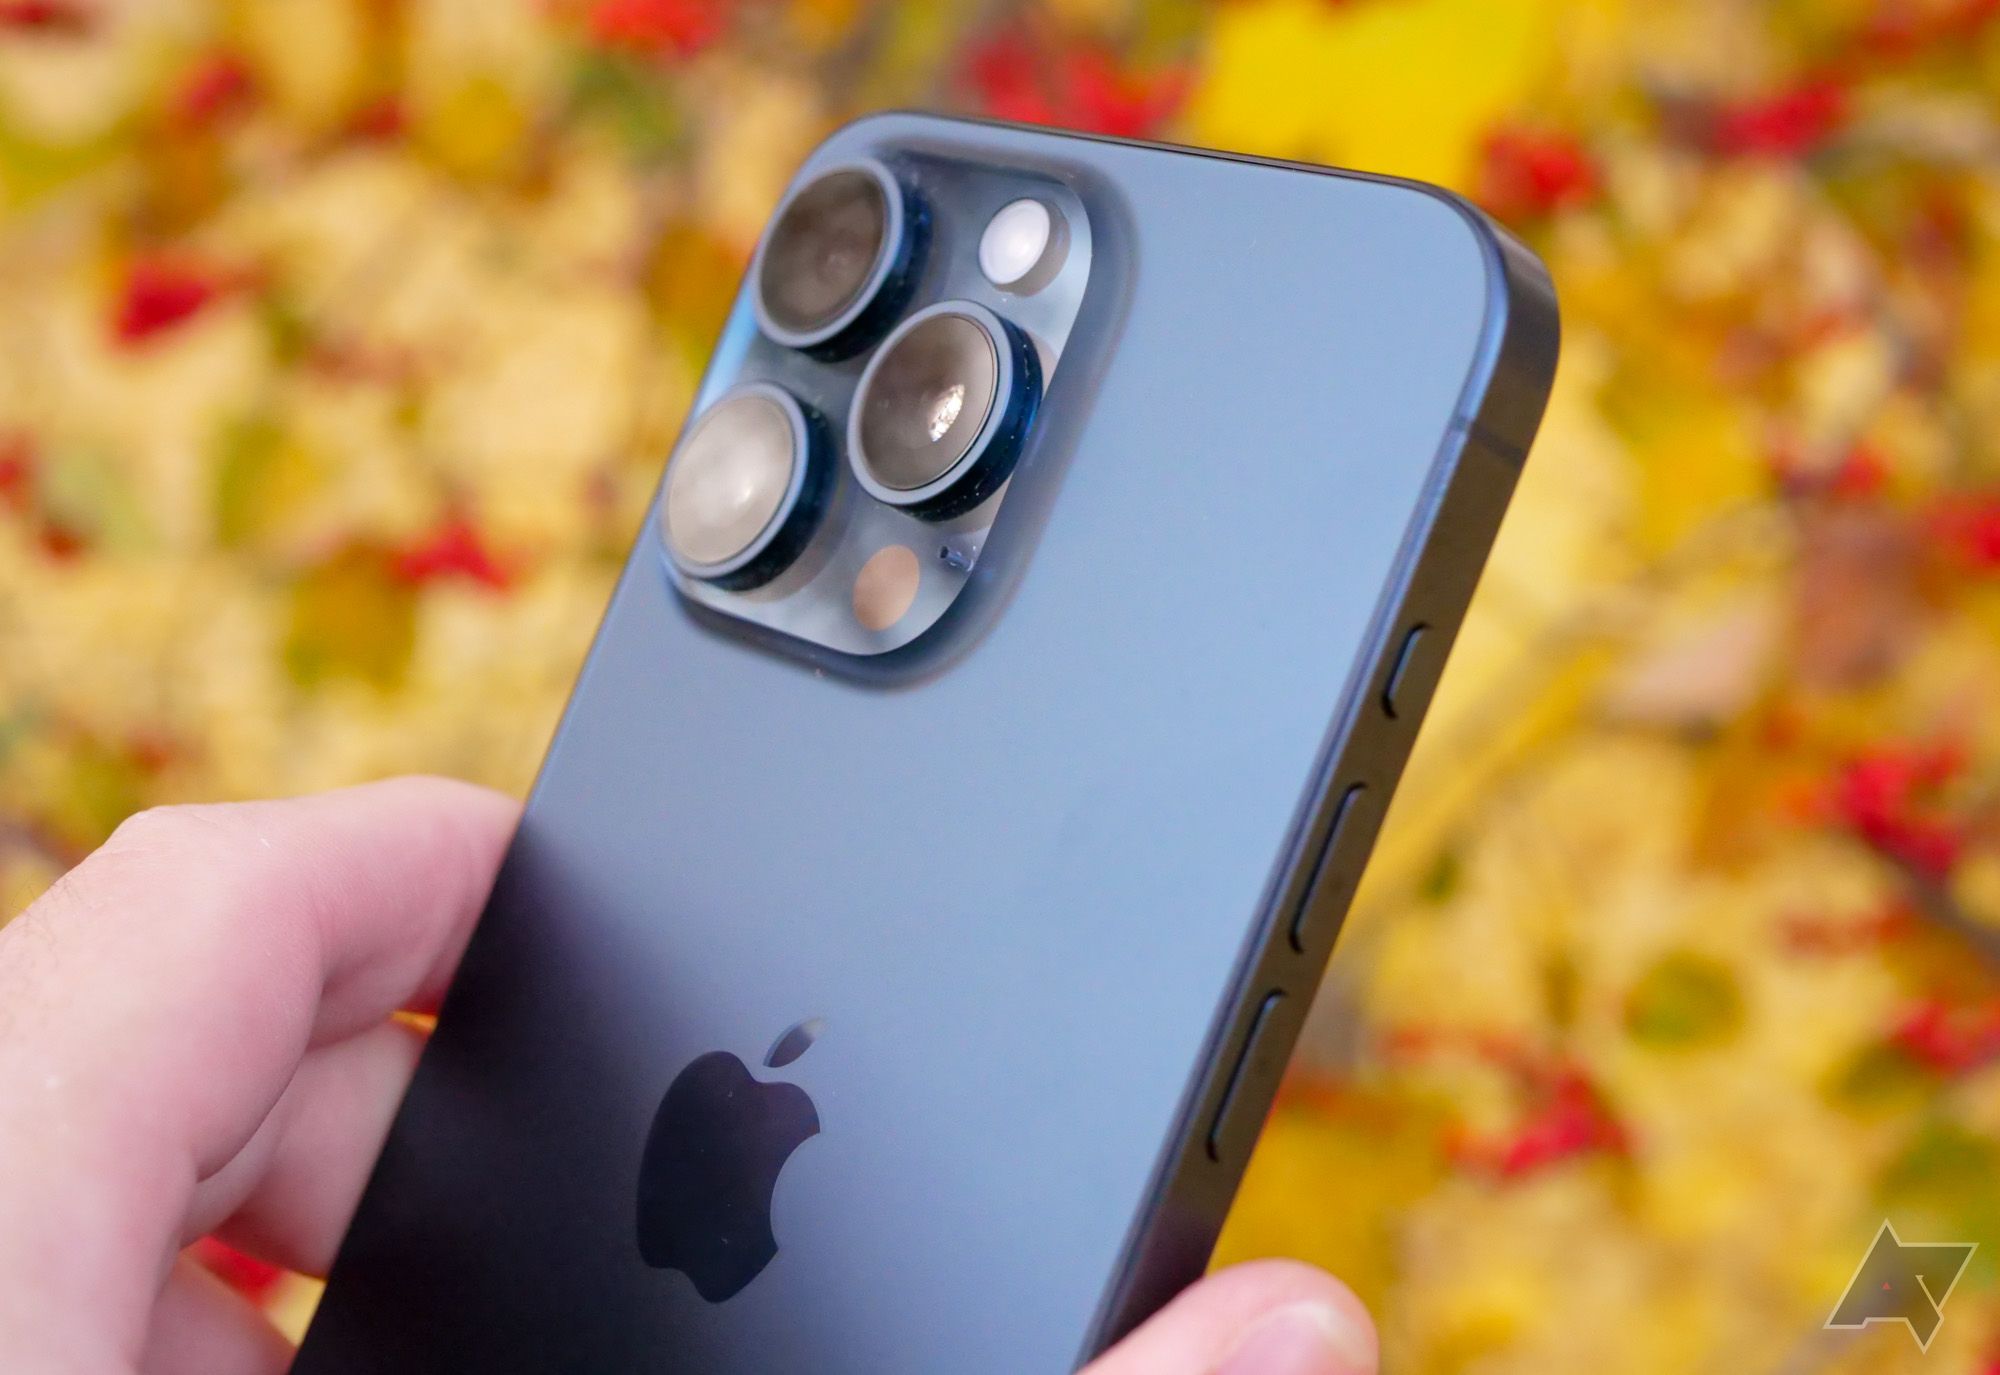 The iPhone 15 Pro Max against a backdrop of leaves